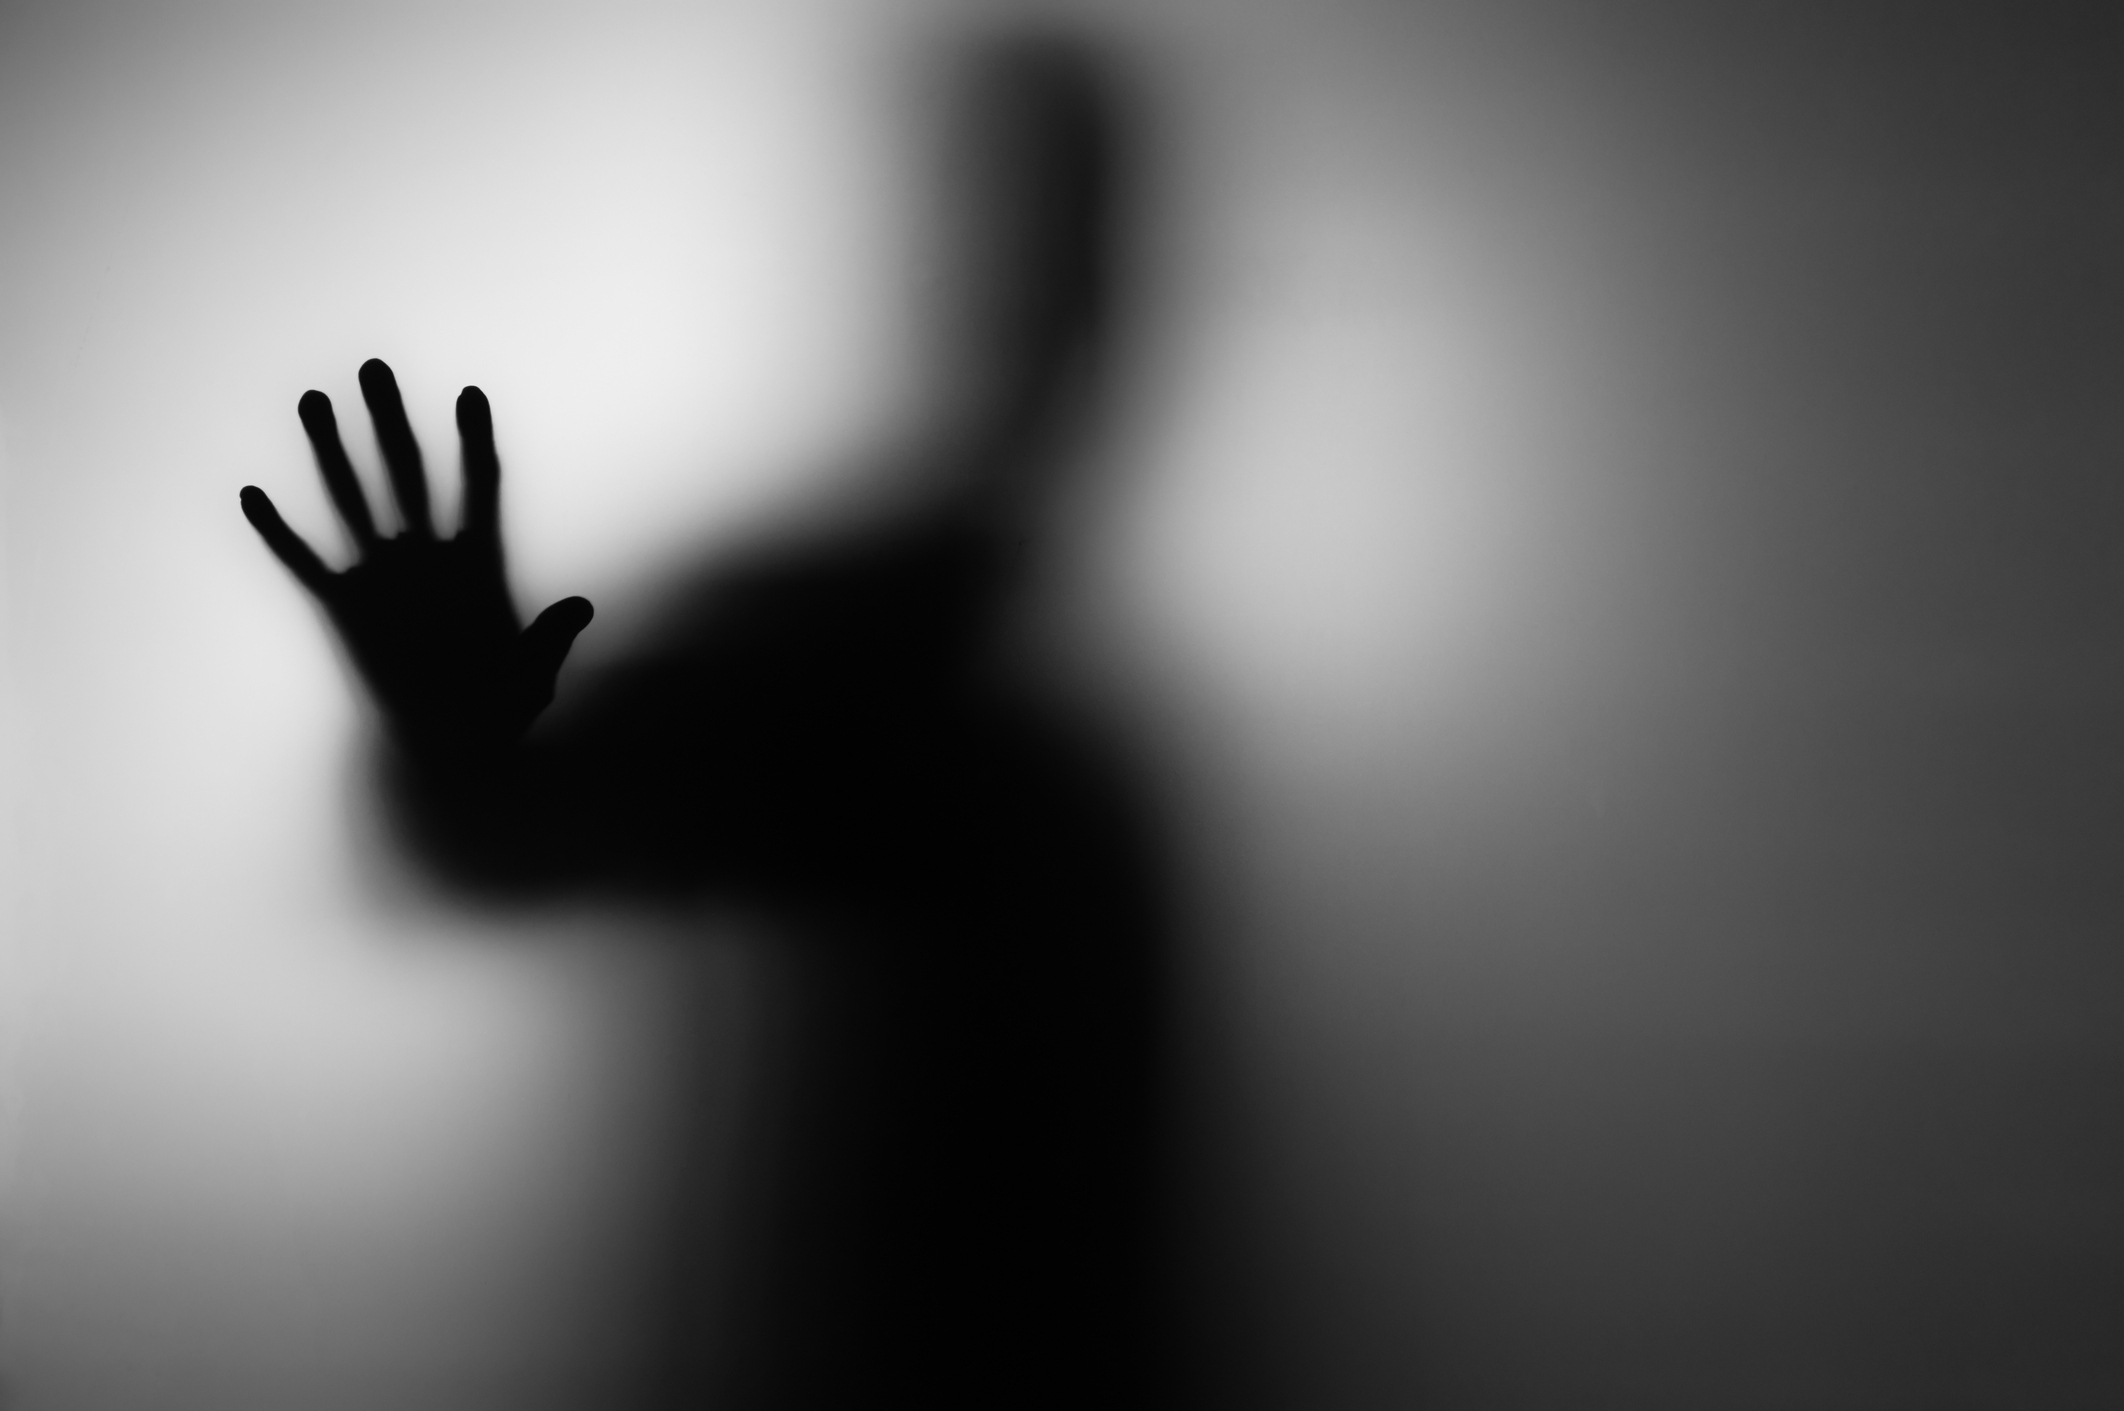 A blurry silhouette of a person holding their hand up against a translucent barrier